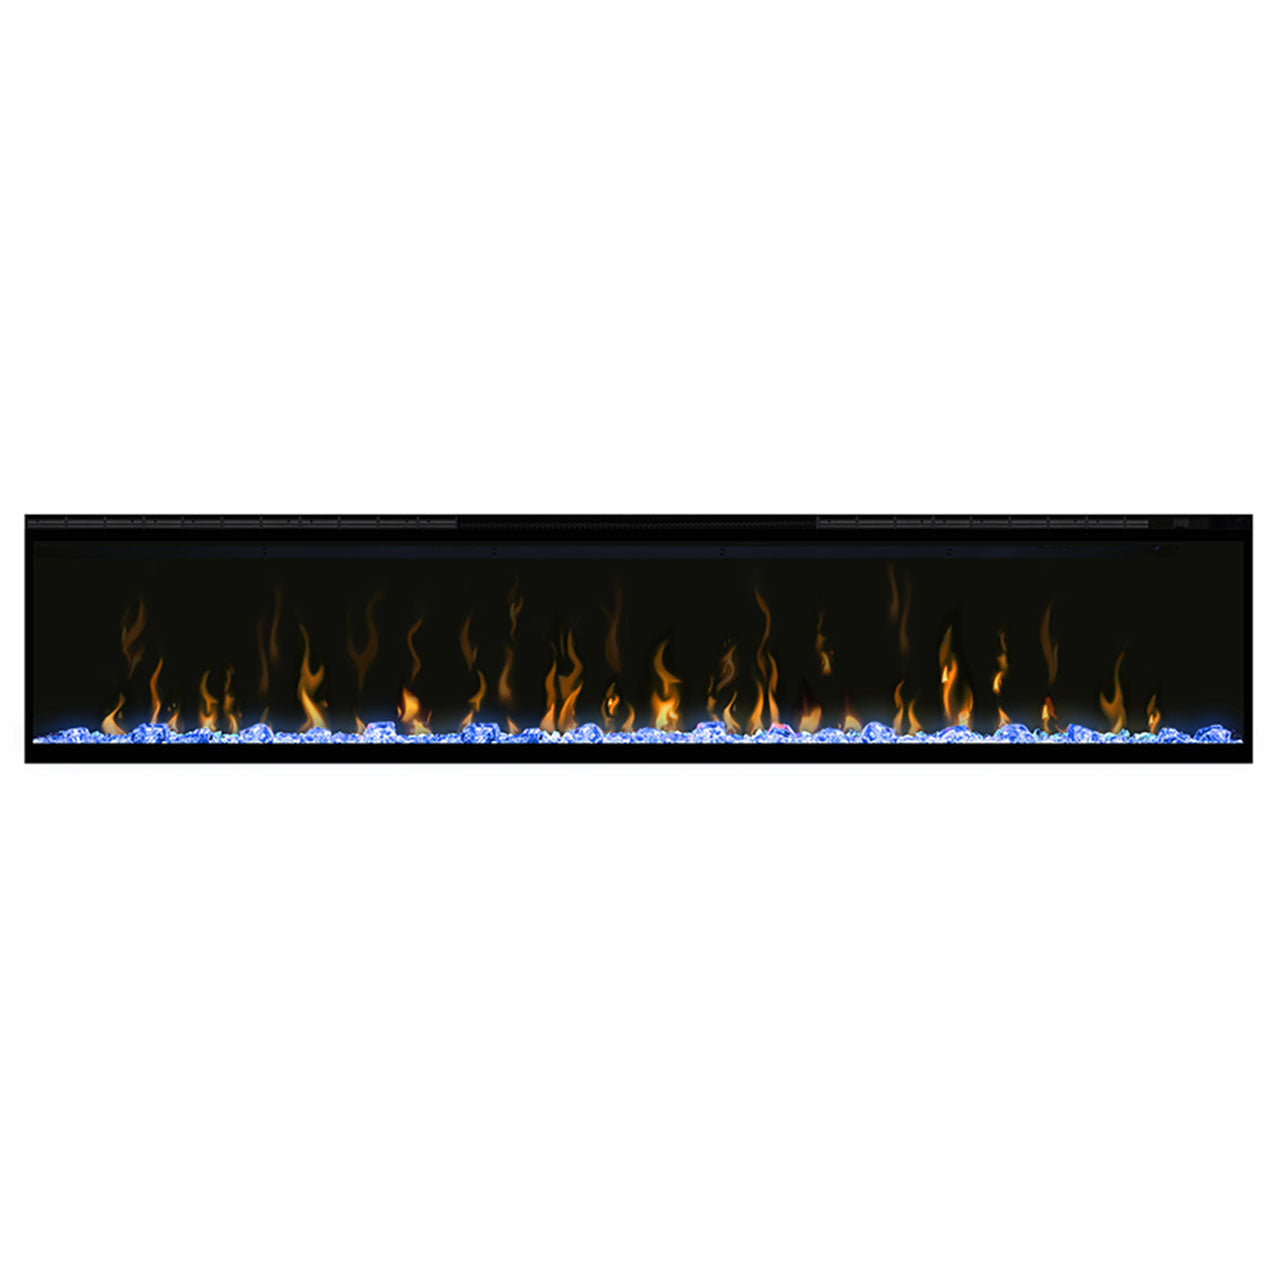 Dimplex XLF74 Ignite Electric Fireplace | Available to order with Barbecues Galore: Burlington, Oakville, Etobicoke & Calgary.